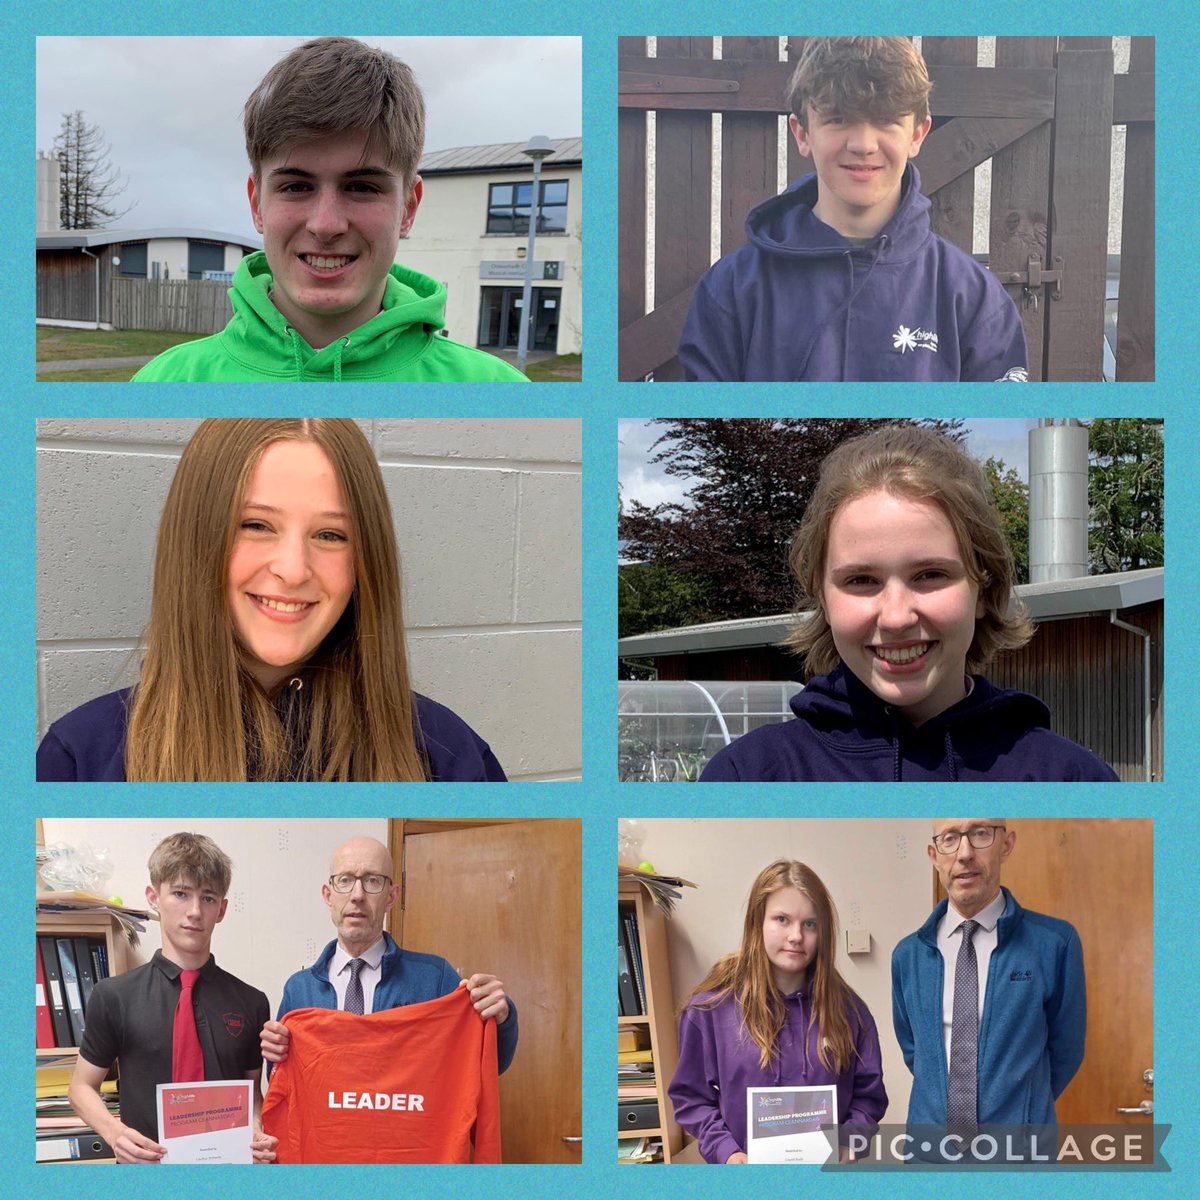 💚💙💜❤️Happy Summer holidays to all of our #Youngleaders Just a reminder of some June #Hoodie presentations 💚❤️💜💙 #Itsallaboutthehoodie #rolemodels #HLHInYourCommunity #HLHMakingLifeBetter @HLHSport @HLHYouthWork @HLHsocial @LochaberHigh @GolspieHigh